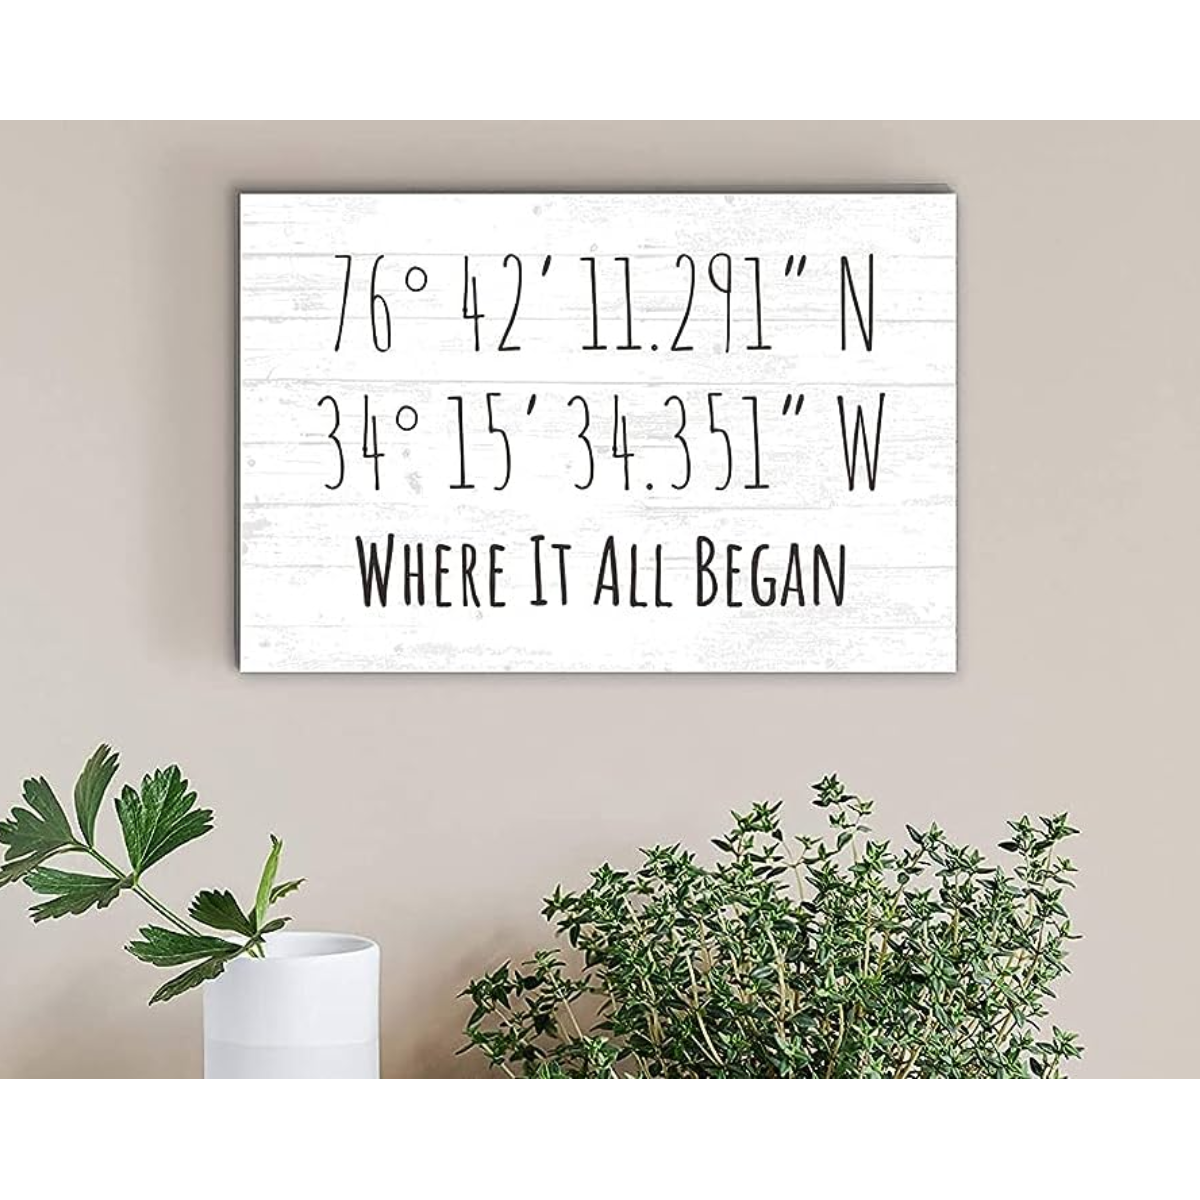 34. Customized Home Coordinates Wall Art: A Unique and Personalized Anniversary Gift for Him